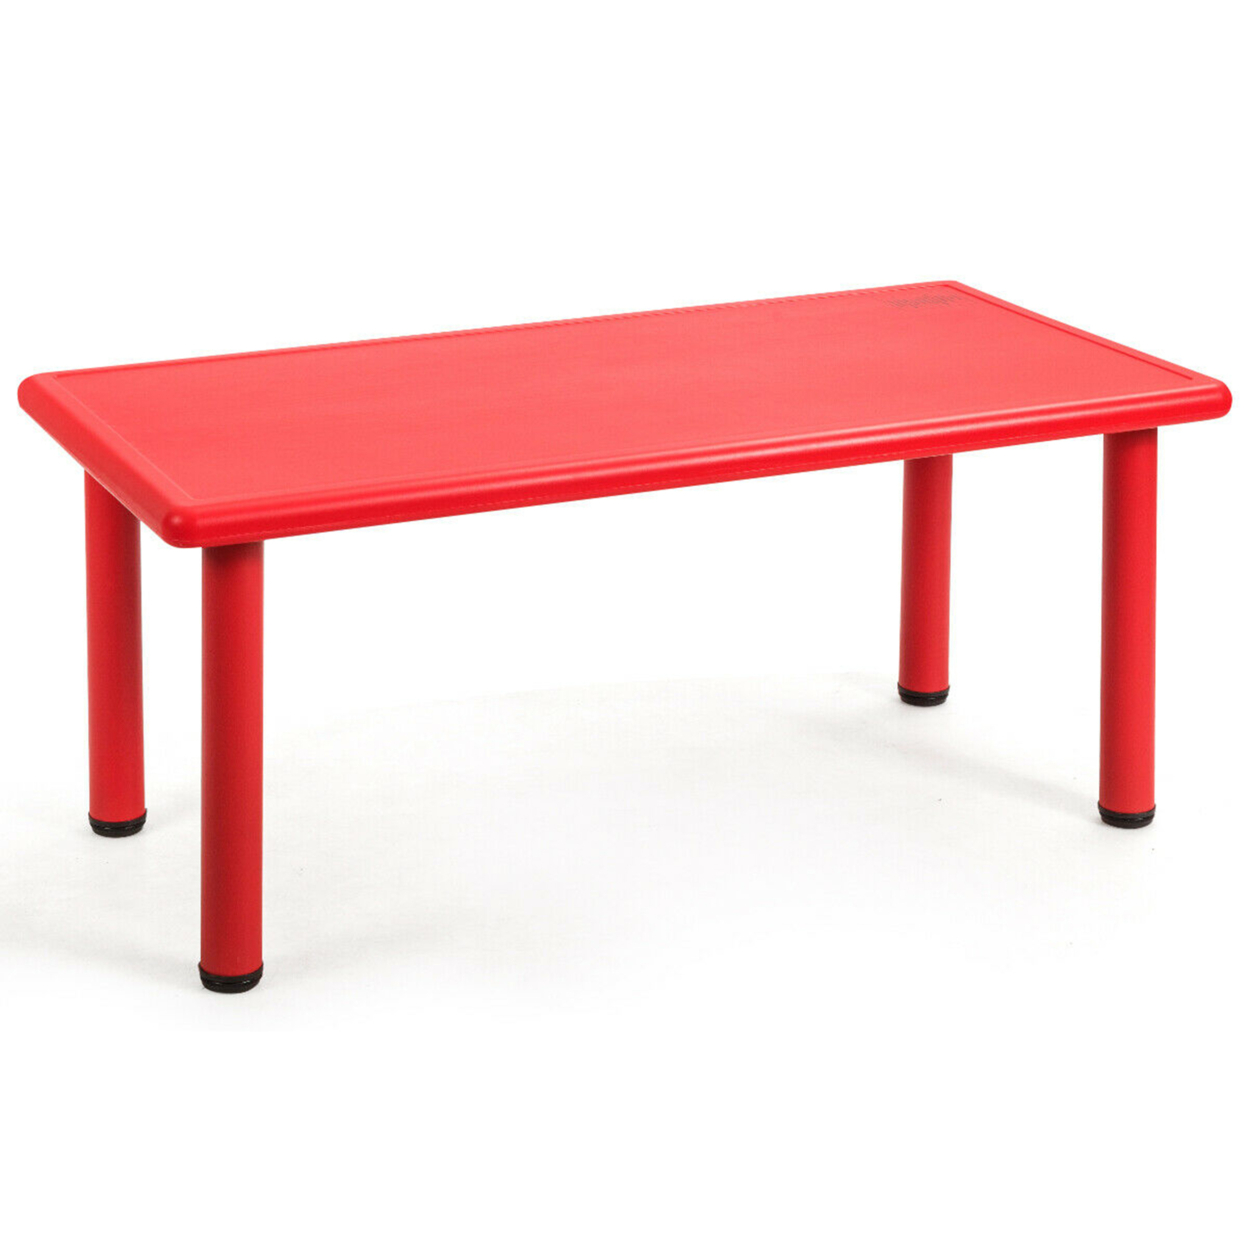 Kids Plastic Rectangular Learn And Play Table Playroom Kindergarten Home Red